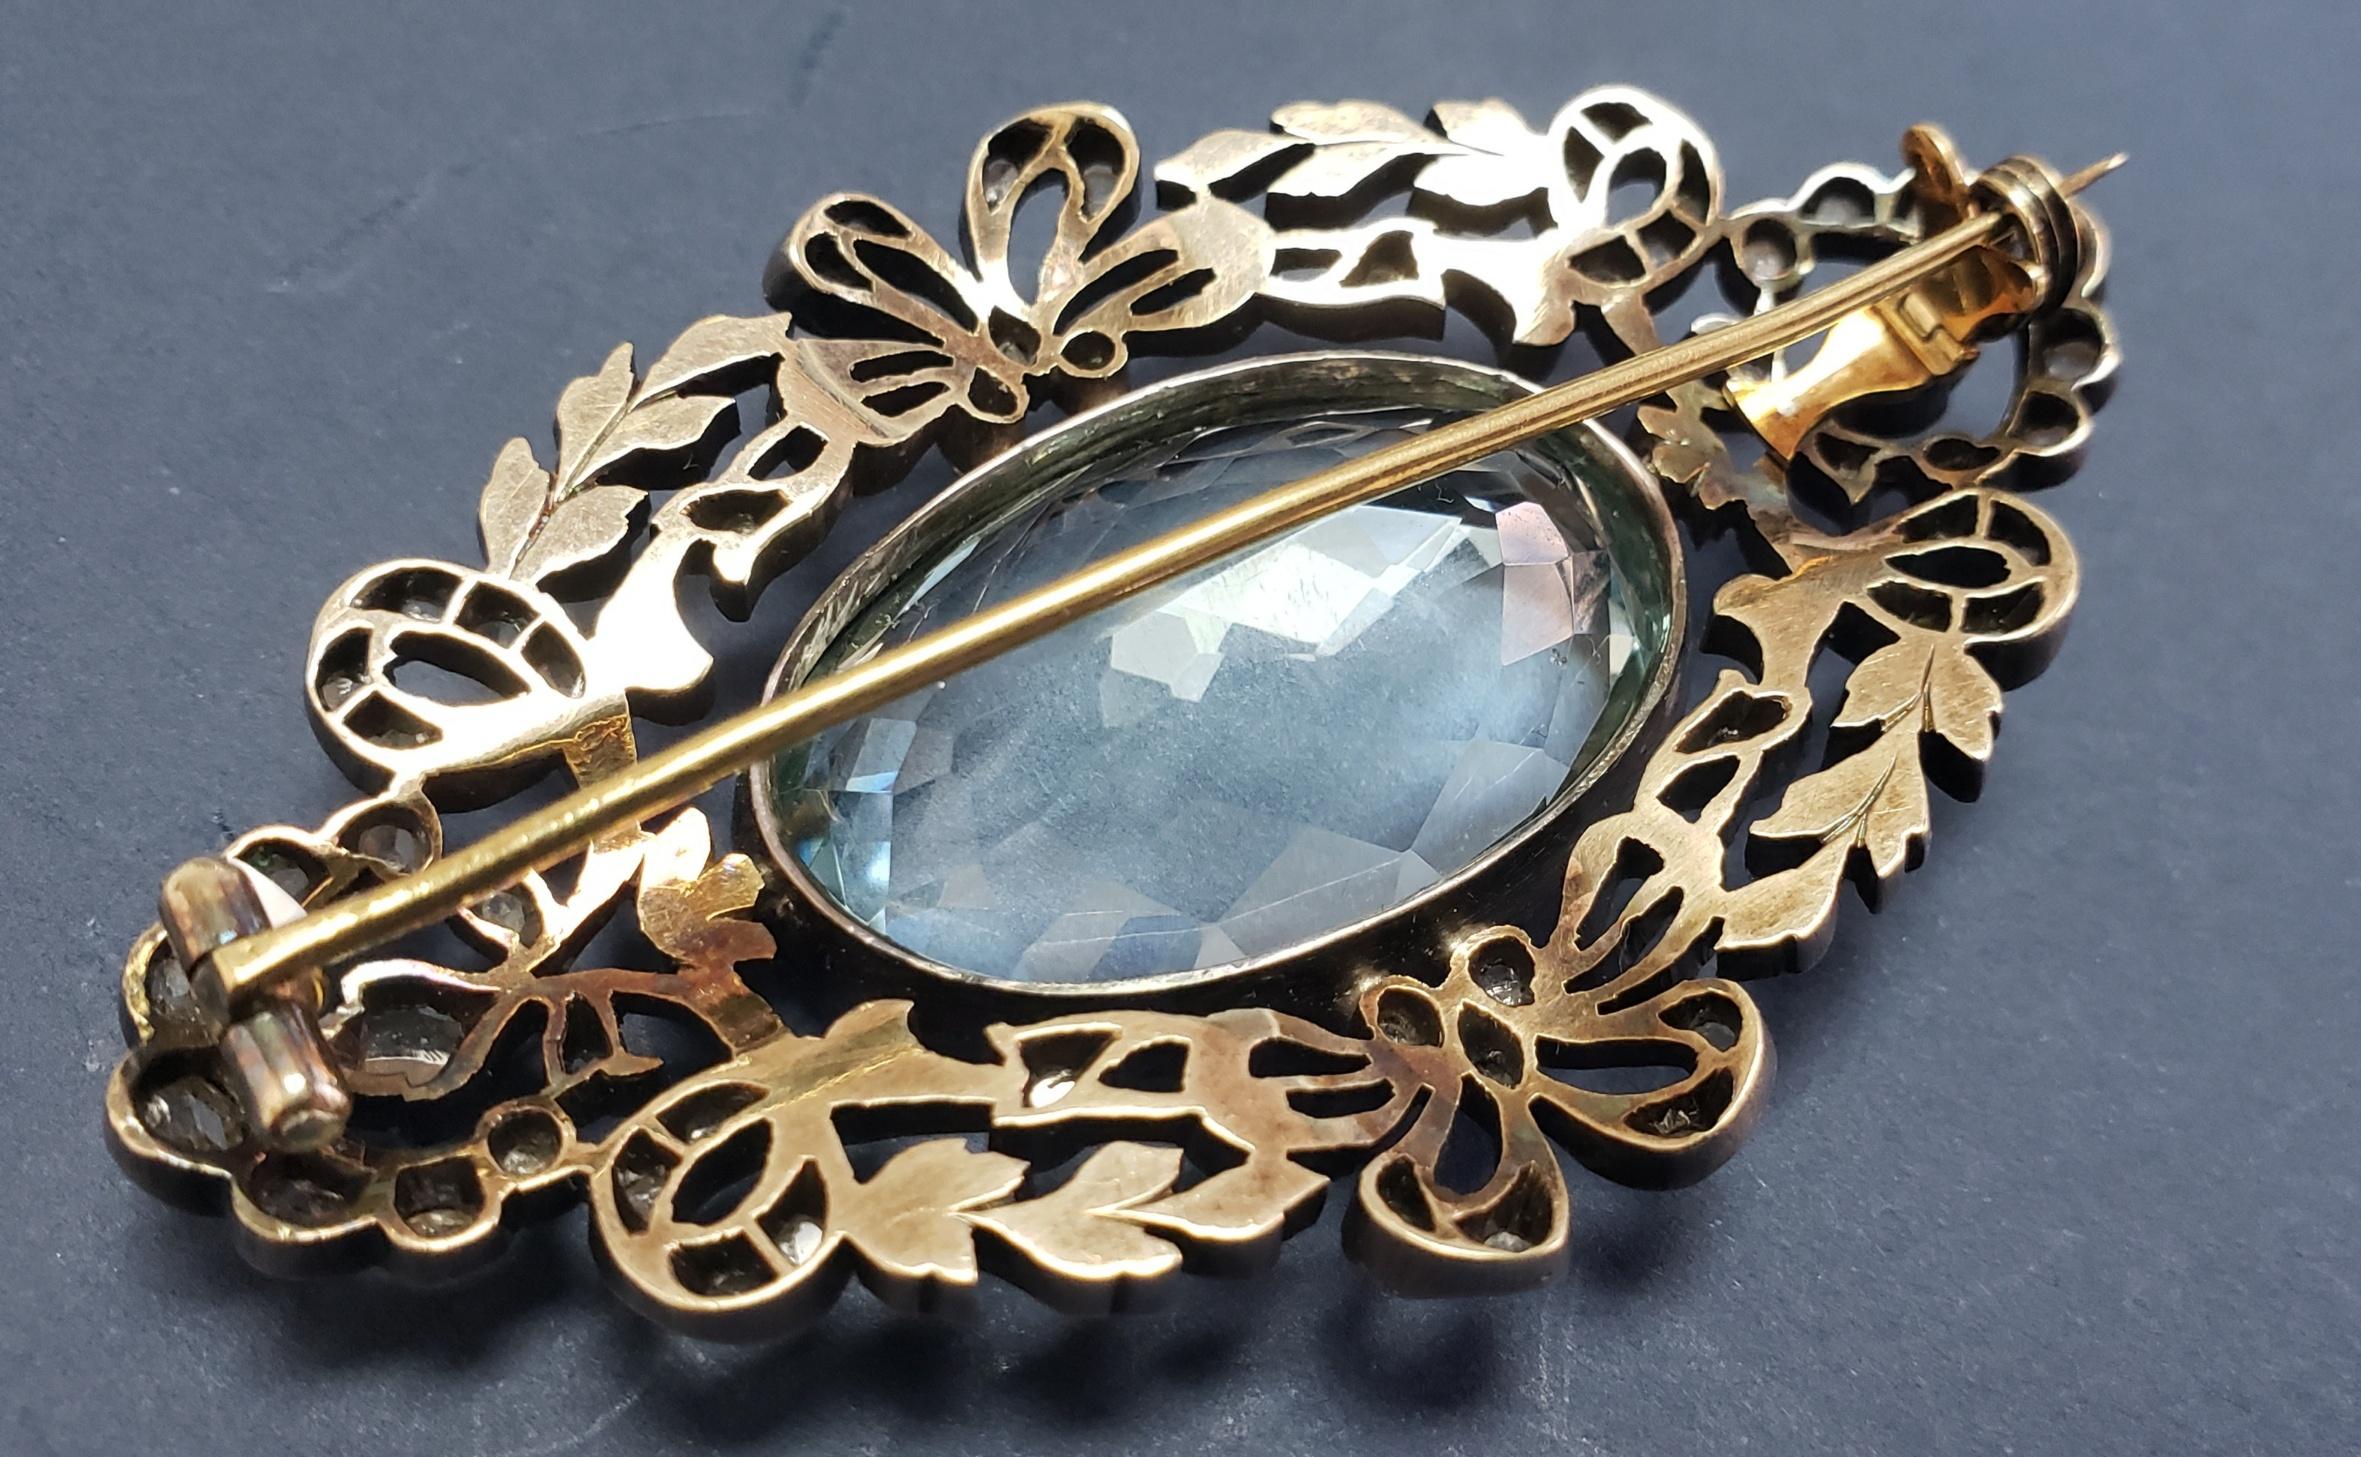 Oval Cut 55.00CT Aquamarine Brooch Silver over Gold C. Dunaigre Lab. For Sale